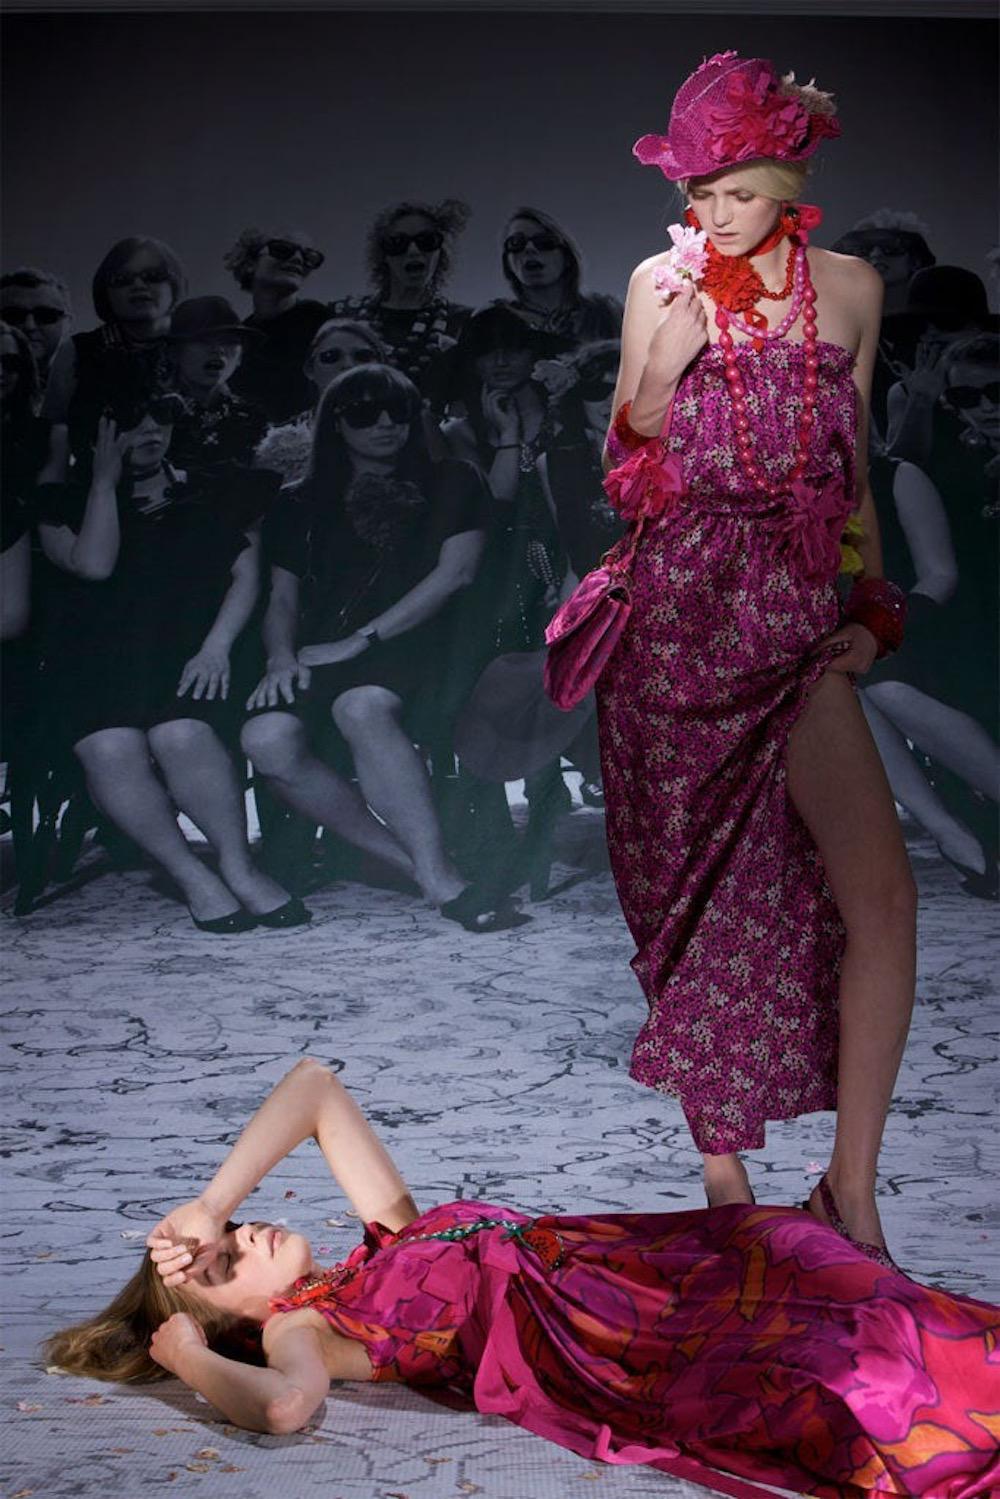 Dating to the Acapulco inspired Resort 2010 collection, this stunning gown designed by Alber Elbaz for Lanvin makes the perfect travel companion. Made from hot pink silk satin with a tiny floral print in pale pink & green. this features an